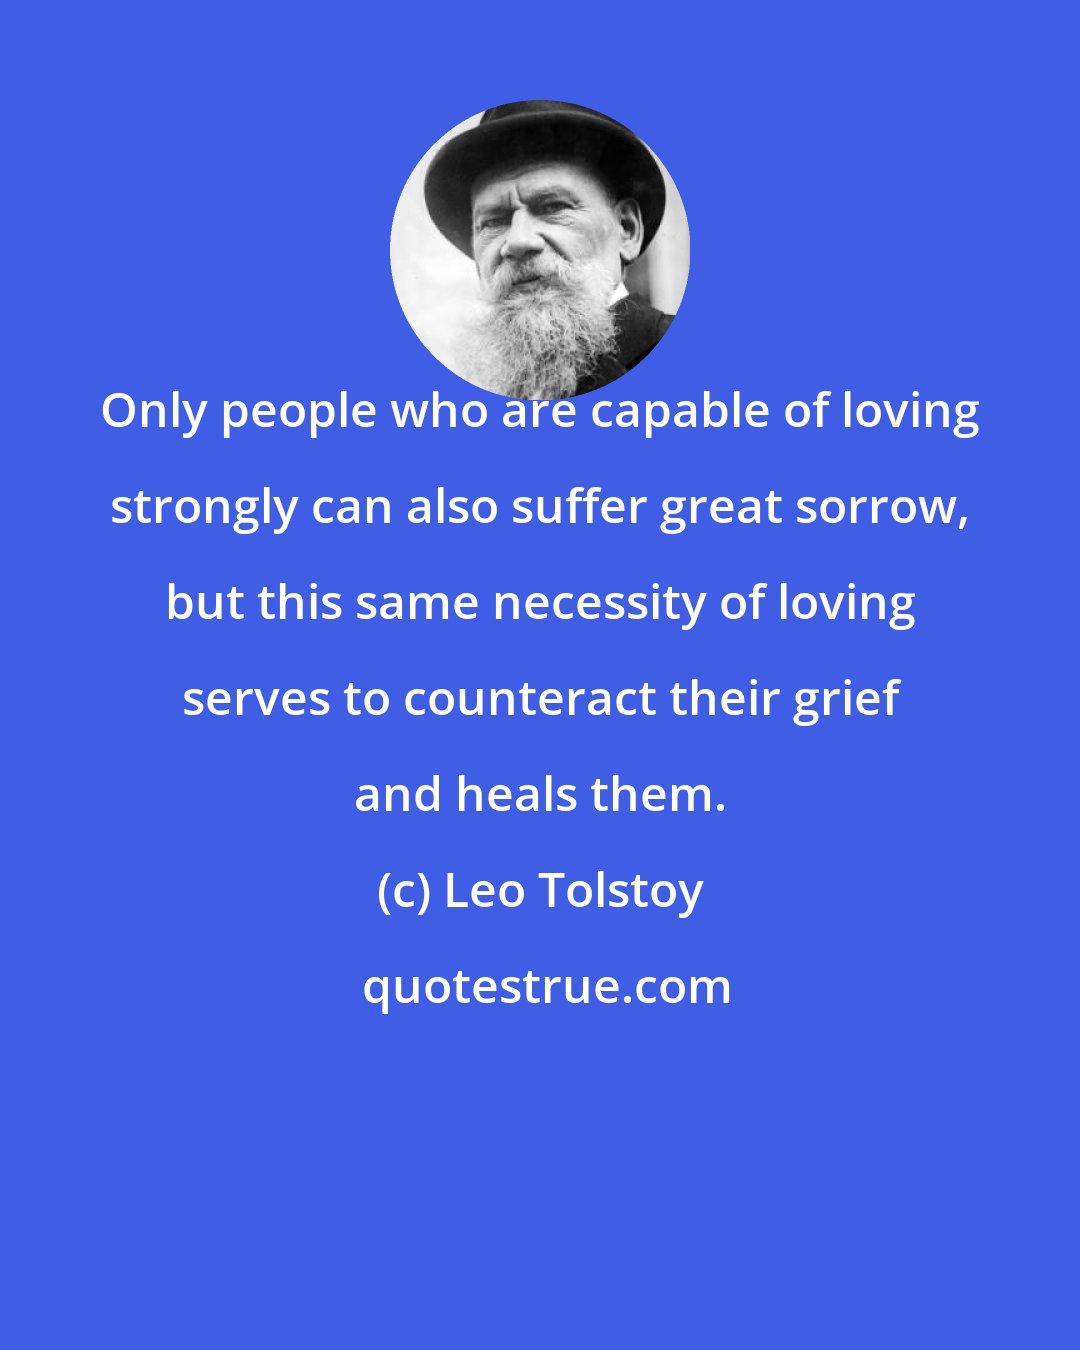 Leo Tolstoy: Only people who are capable of loving strongly can also suffer great sorrow, but this same necessity of loving serves to counteract their grief and heals them.